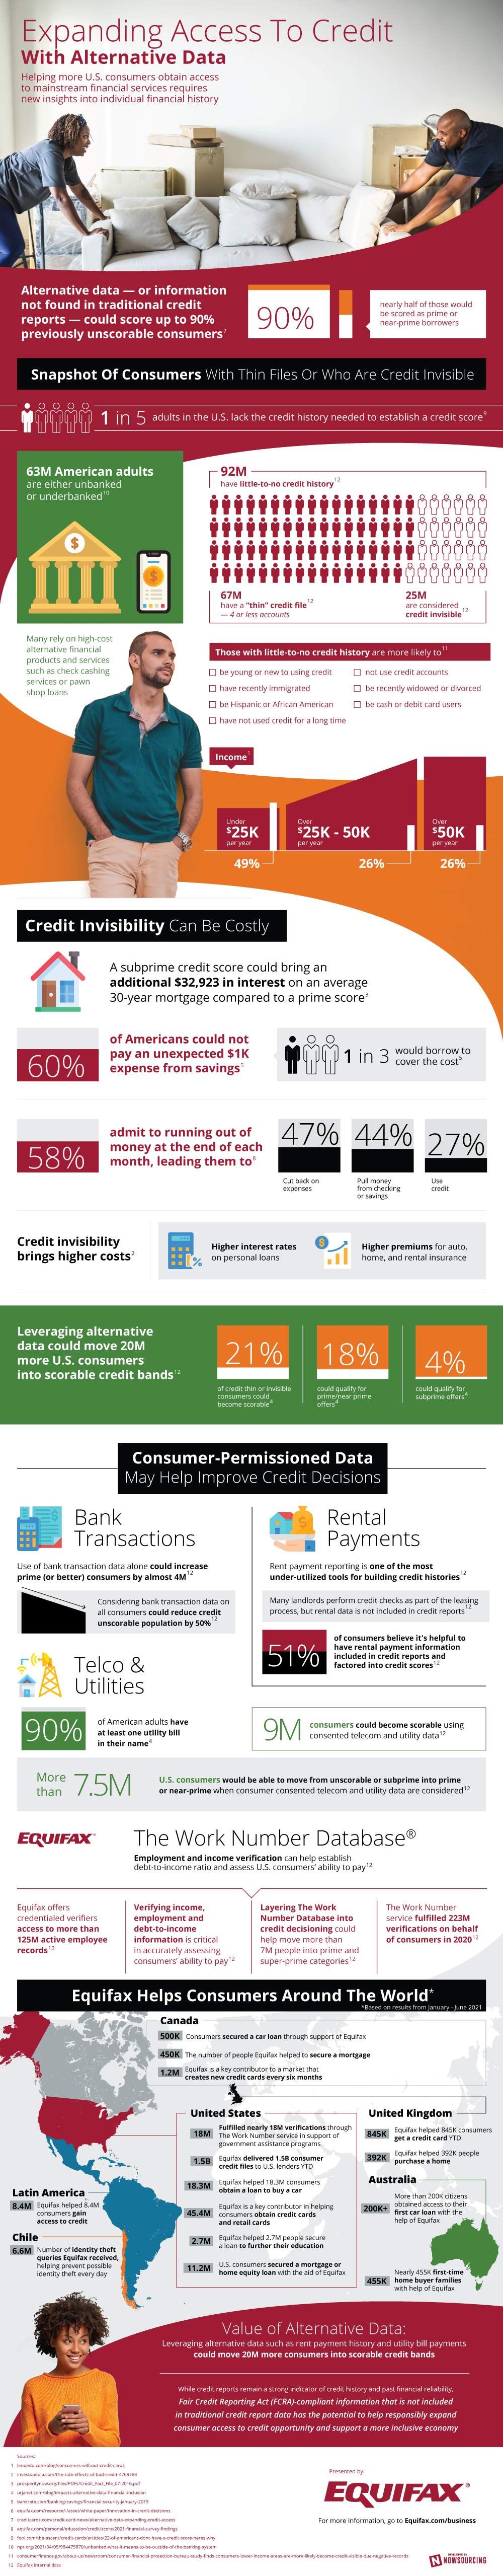 Infographic: Expanding your credit access with "alternative data"